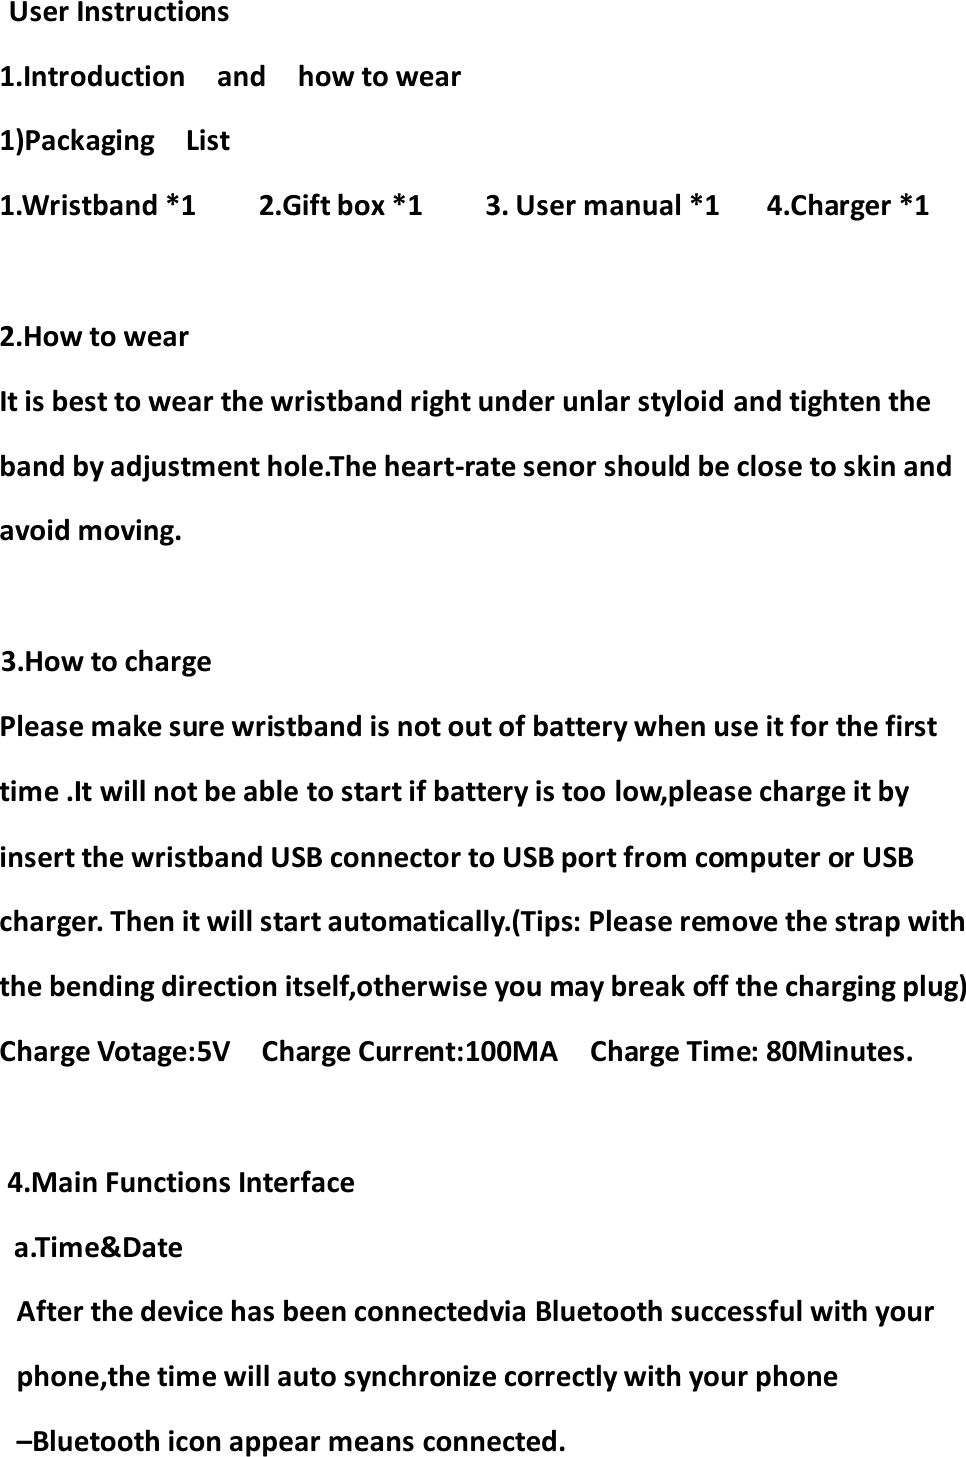      User Instructions 1.Introduction    and    how to wear 1)Packaging    List 1.Wristband *1        2.Gift box *1        3. User manual *1      4.Charger *1  2.How to wear It is best to wear the wristband right under unlar styloid and tighten the band by adjustment hole.The heart-rate senor should be close to skin and avoid moving.  3.How to charge     Please make sure wristband is not out of battery when use it for the first time .It will not be able to start if battery is too low,please charge it by insert the wristband USB connector to USB port from computer or USB charger. Then it will start automatically.(Tips: Please remove the strap with the bending direction itself,otherwise you may break off the charging plug) Charge Votage:5V    Charge Current:100MA    Charge Time: 80Minutes.  4.Main Functions Interface a.Time&amp;Date After the device has been connectedvia Bluetooth successful with your phone,the time will auto synchronize correctly with your phone –Bluetooth icon appear means connected.   